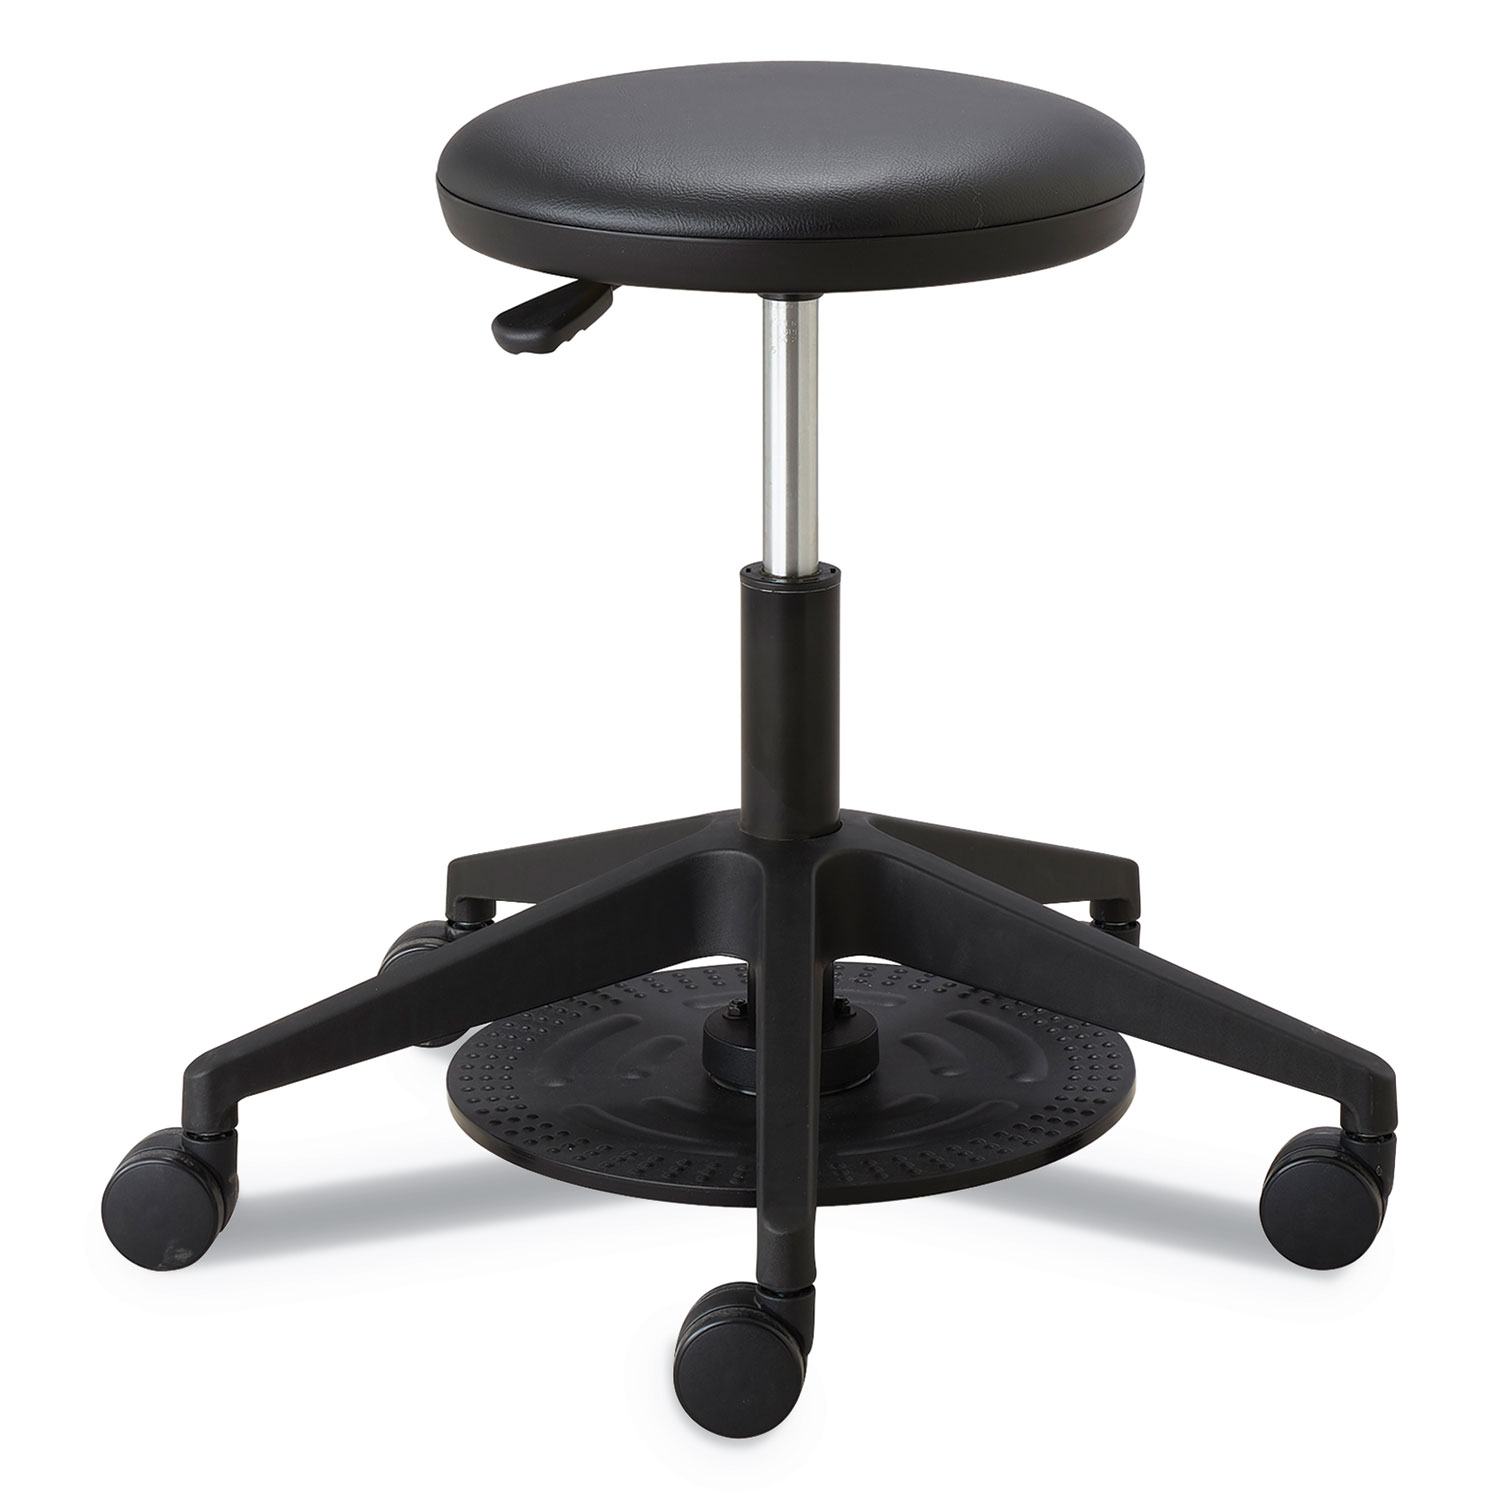  Safco 3437BL Lab Stool, 24.25 Seat Height, Supports up to 250 lbs., Black Seat/Black Back, Black Base (SAF3437BL) 